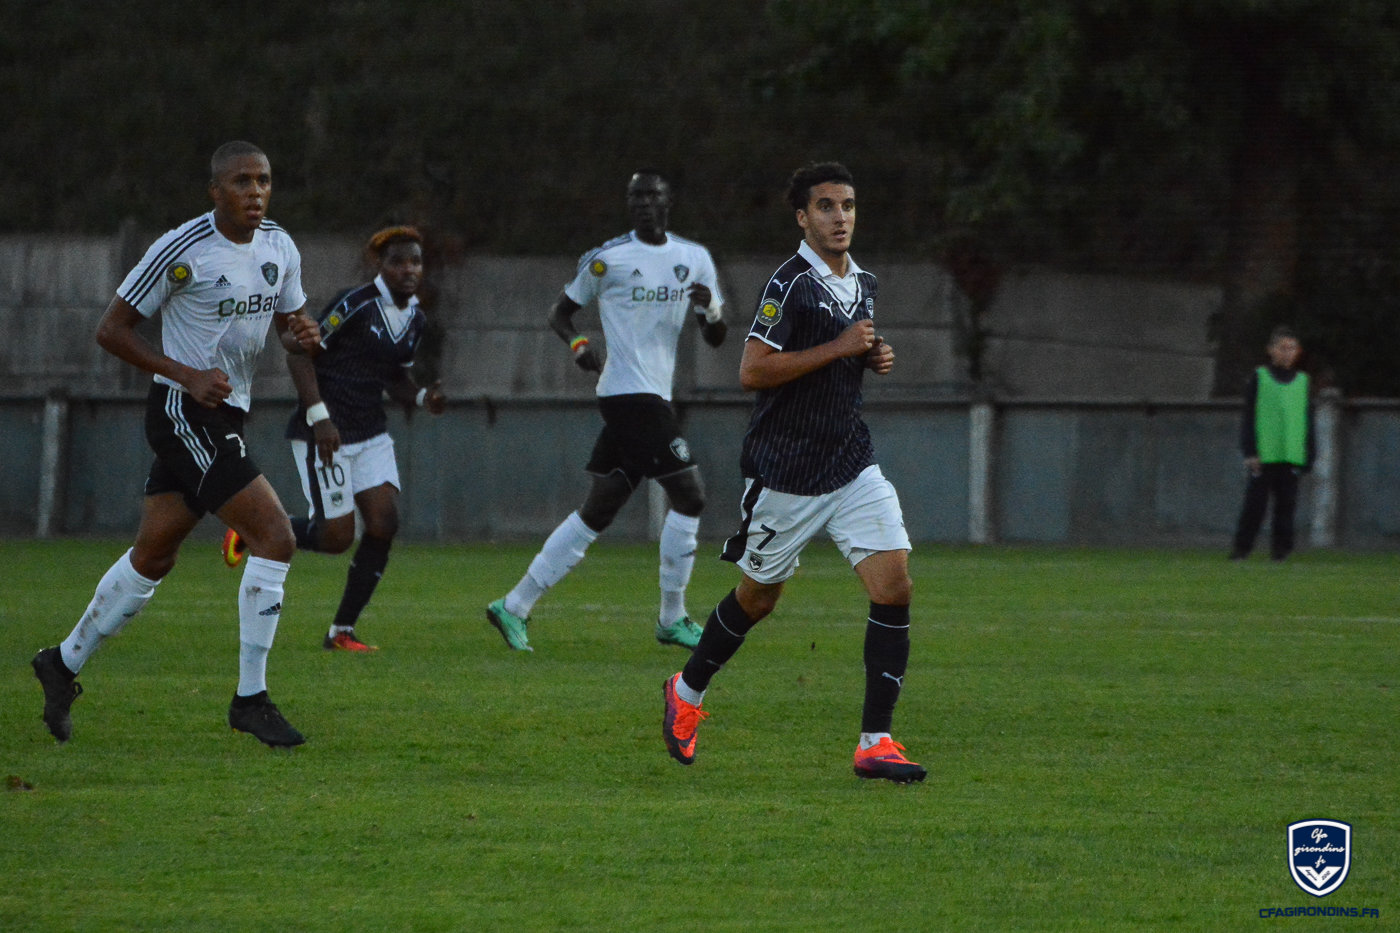 Cfa Girondins : Match nul dans le derby (2-2) - Formation Girondins 